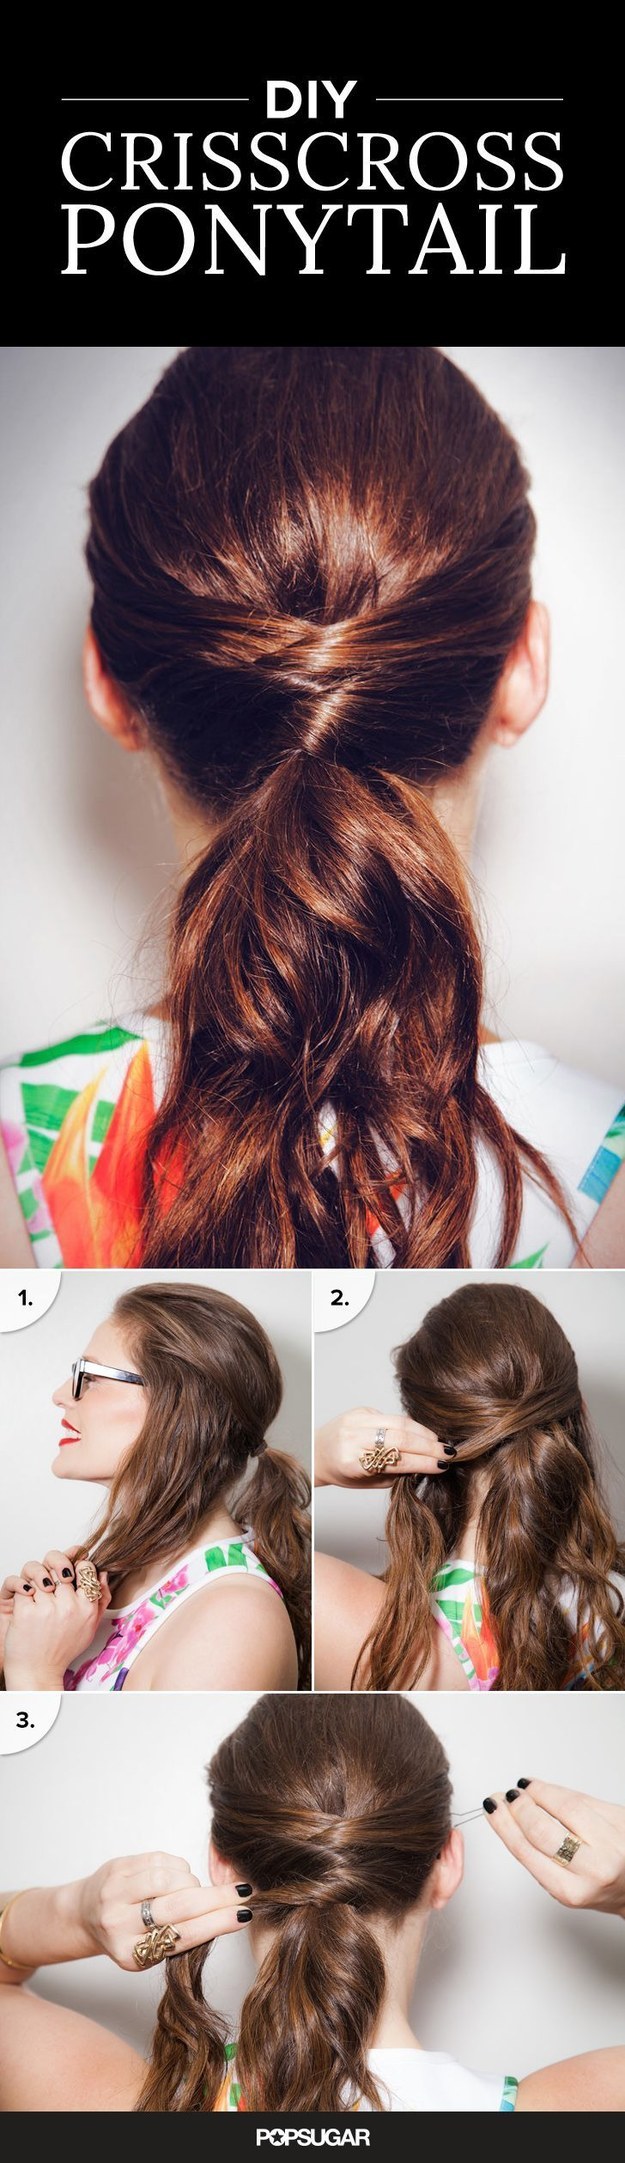 Hairstyles For Long Hair Buzzfeed